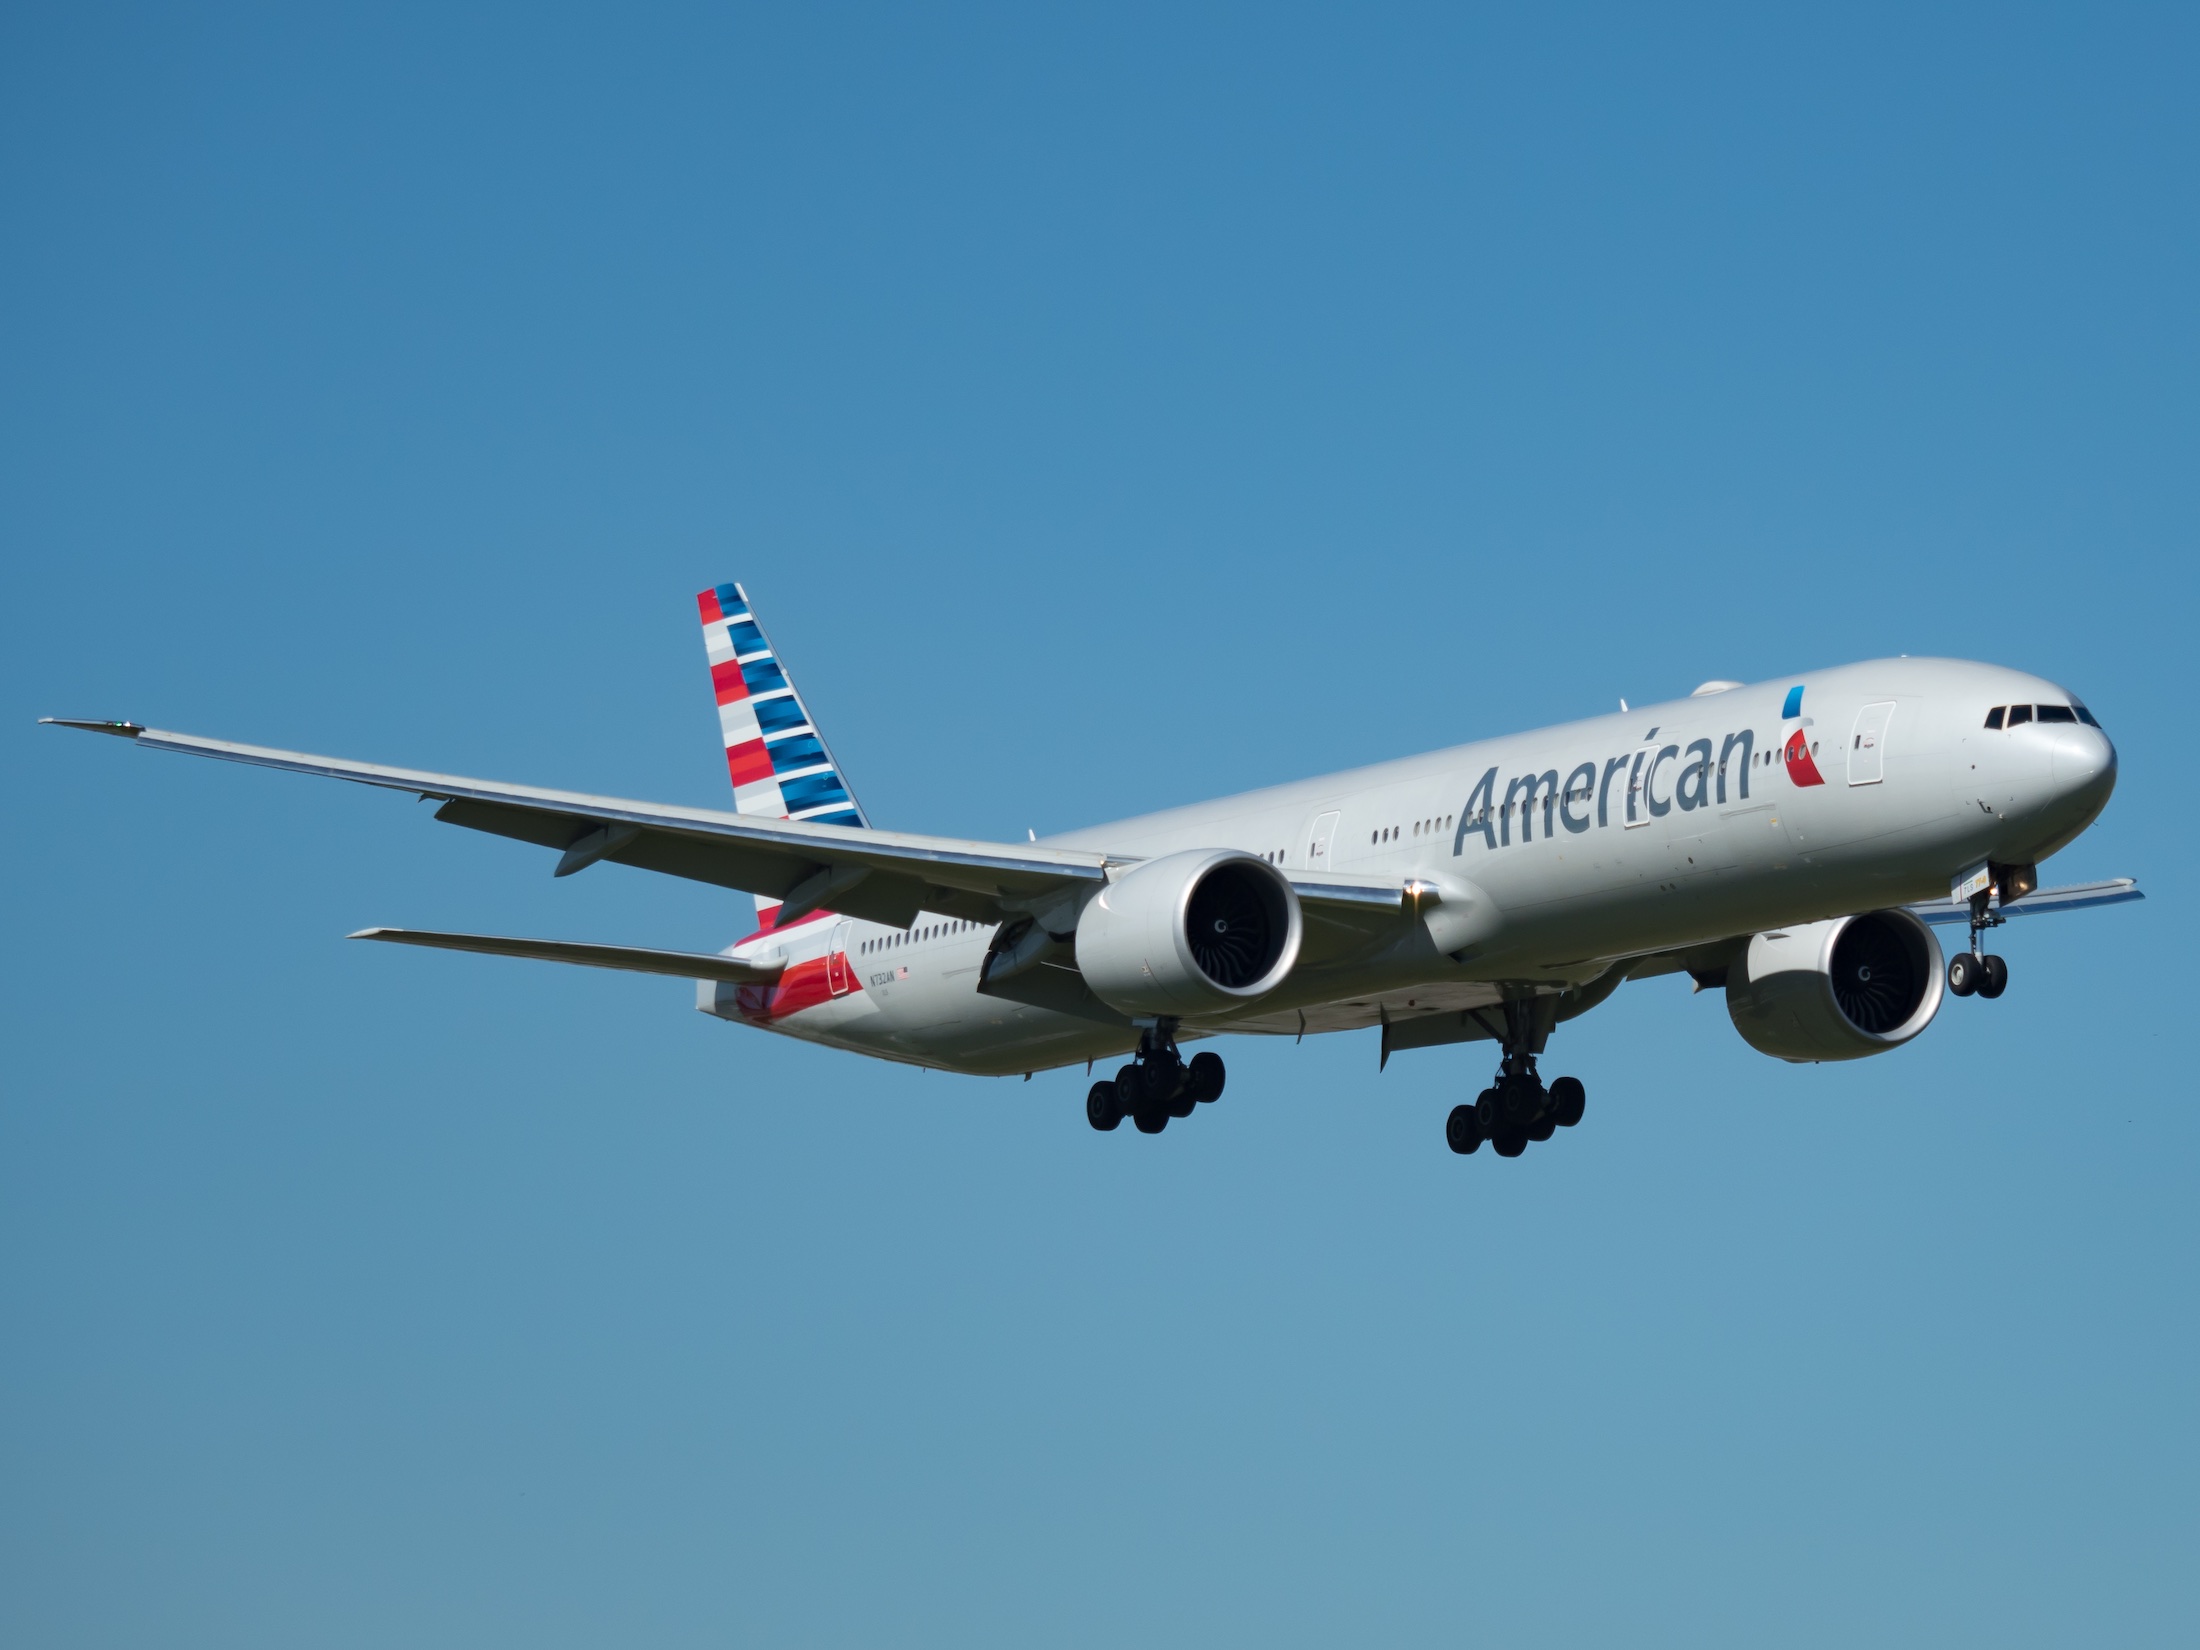 American Airlines Showers 777s On Miami Live and Let's Fly